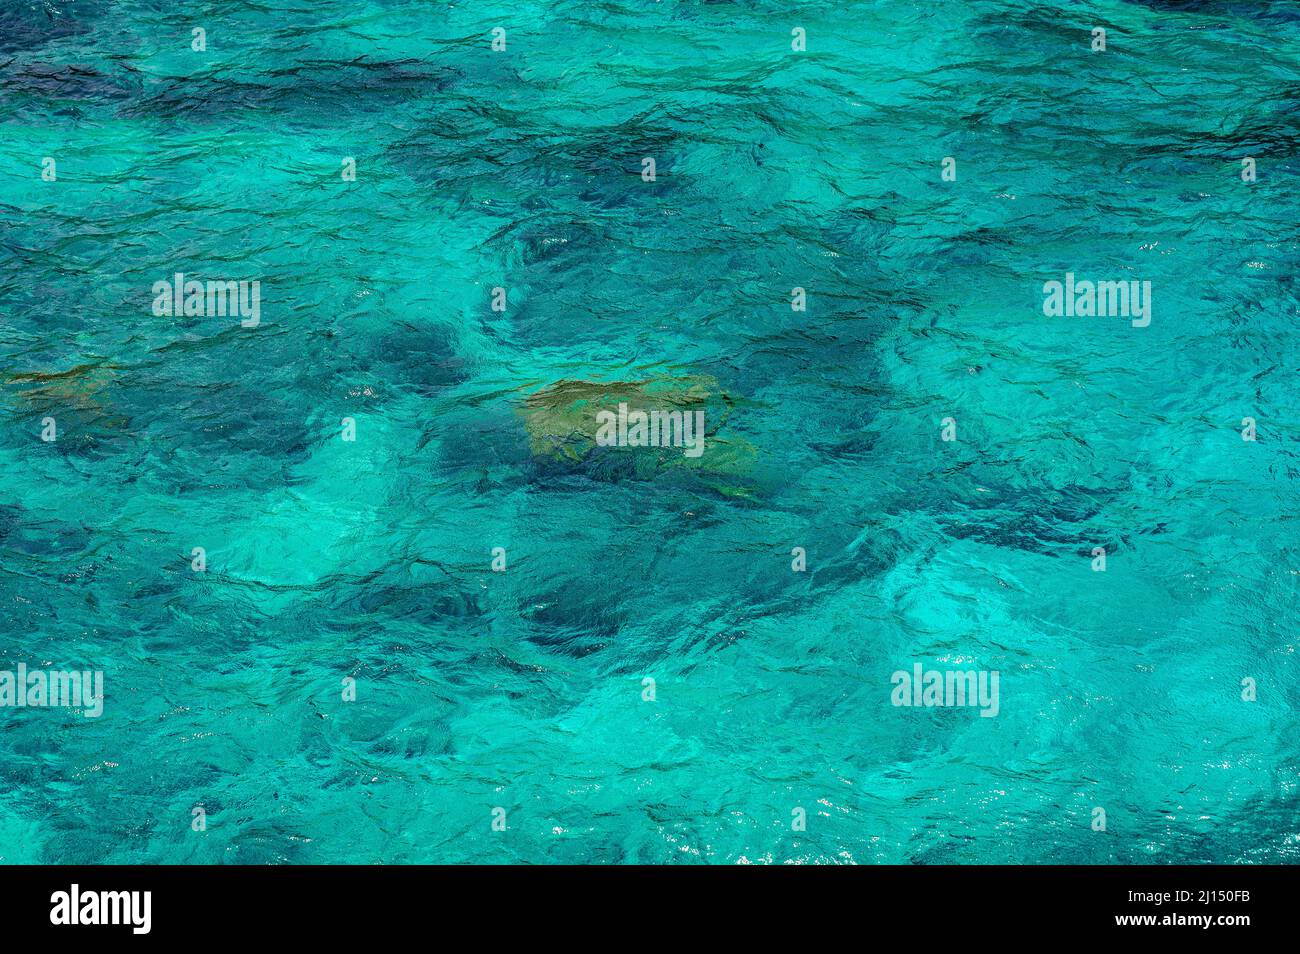 Photo shows texture of ocean. Surface of sea is turquoise. Ocean water pattern is light and in different shades of blue. Background of sea water is tr Stock Photo